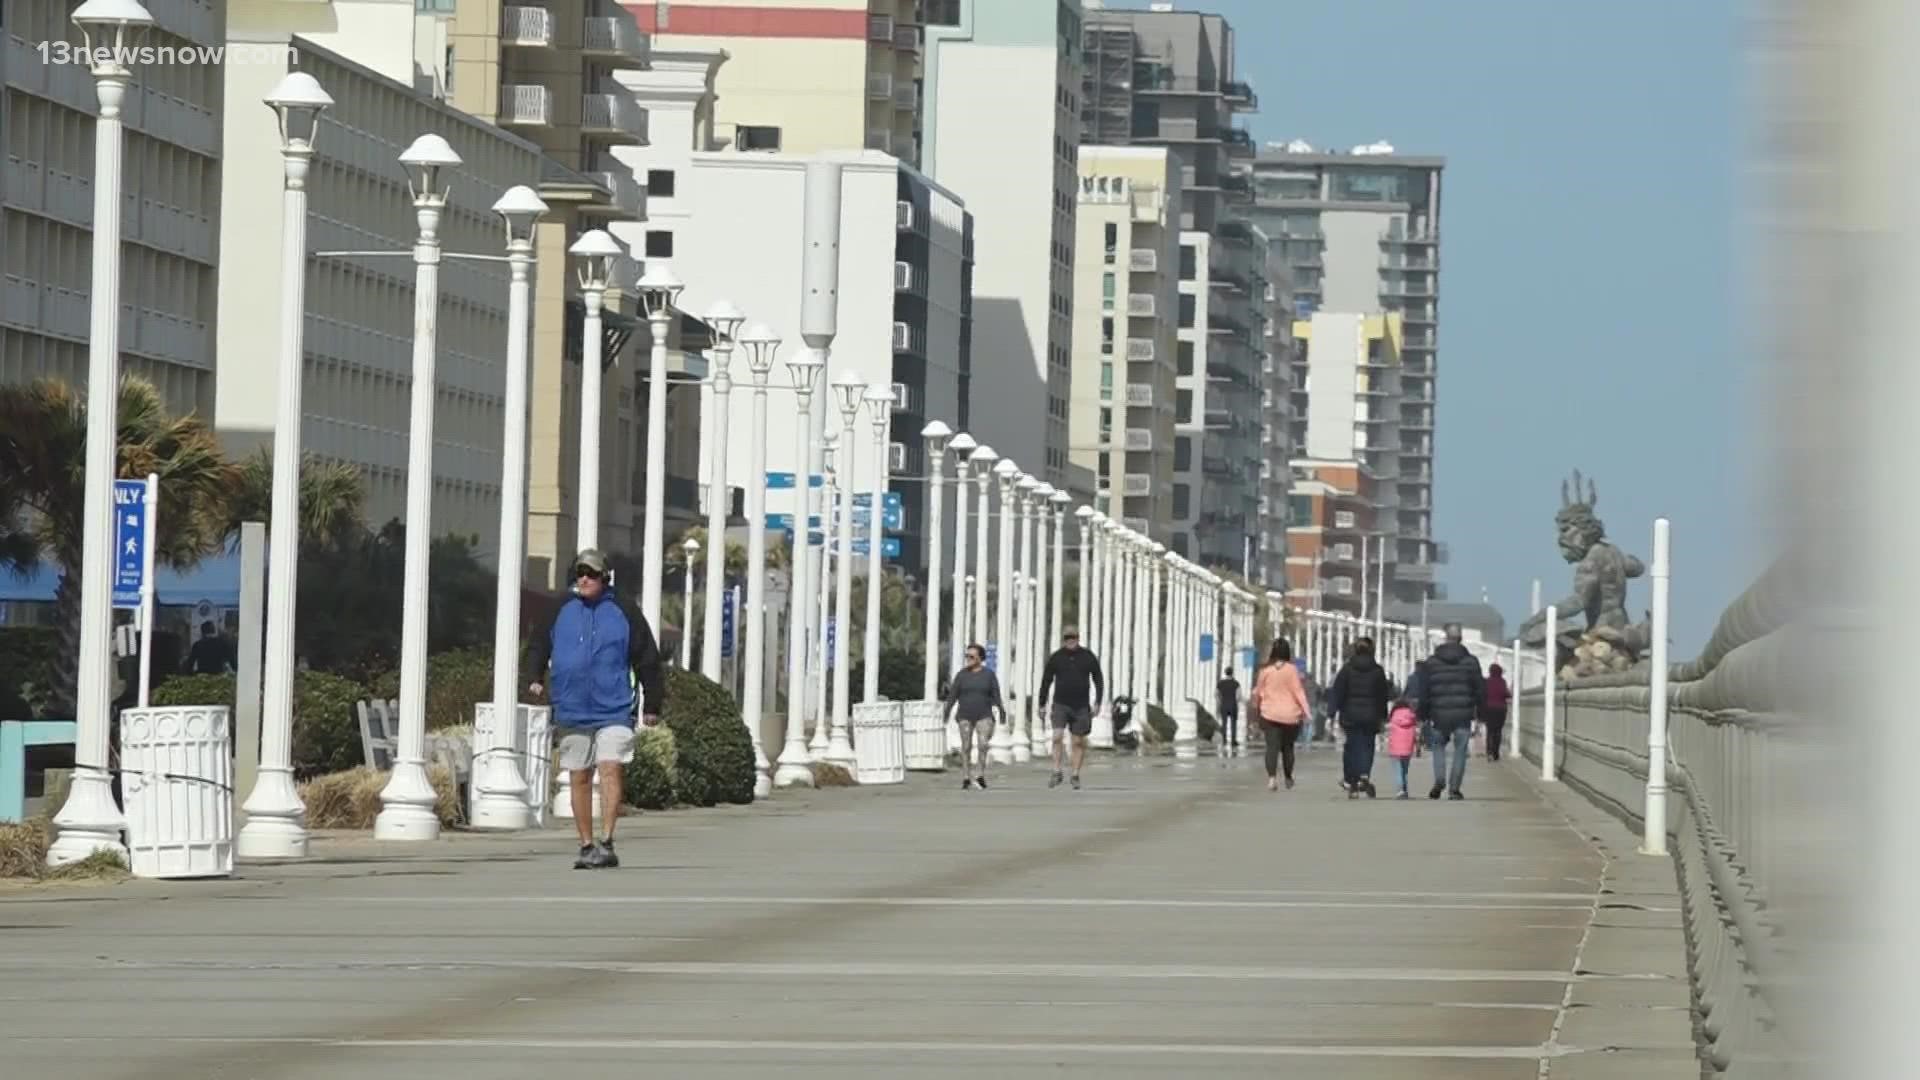 Virginia Beach hotel booking rates for spring break on the rise